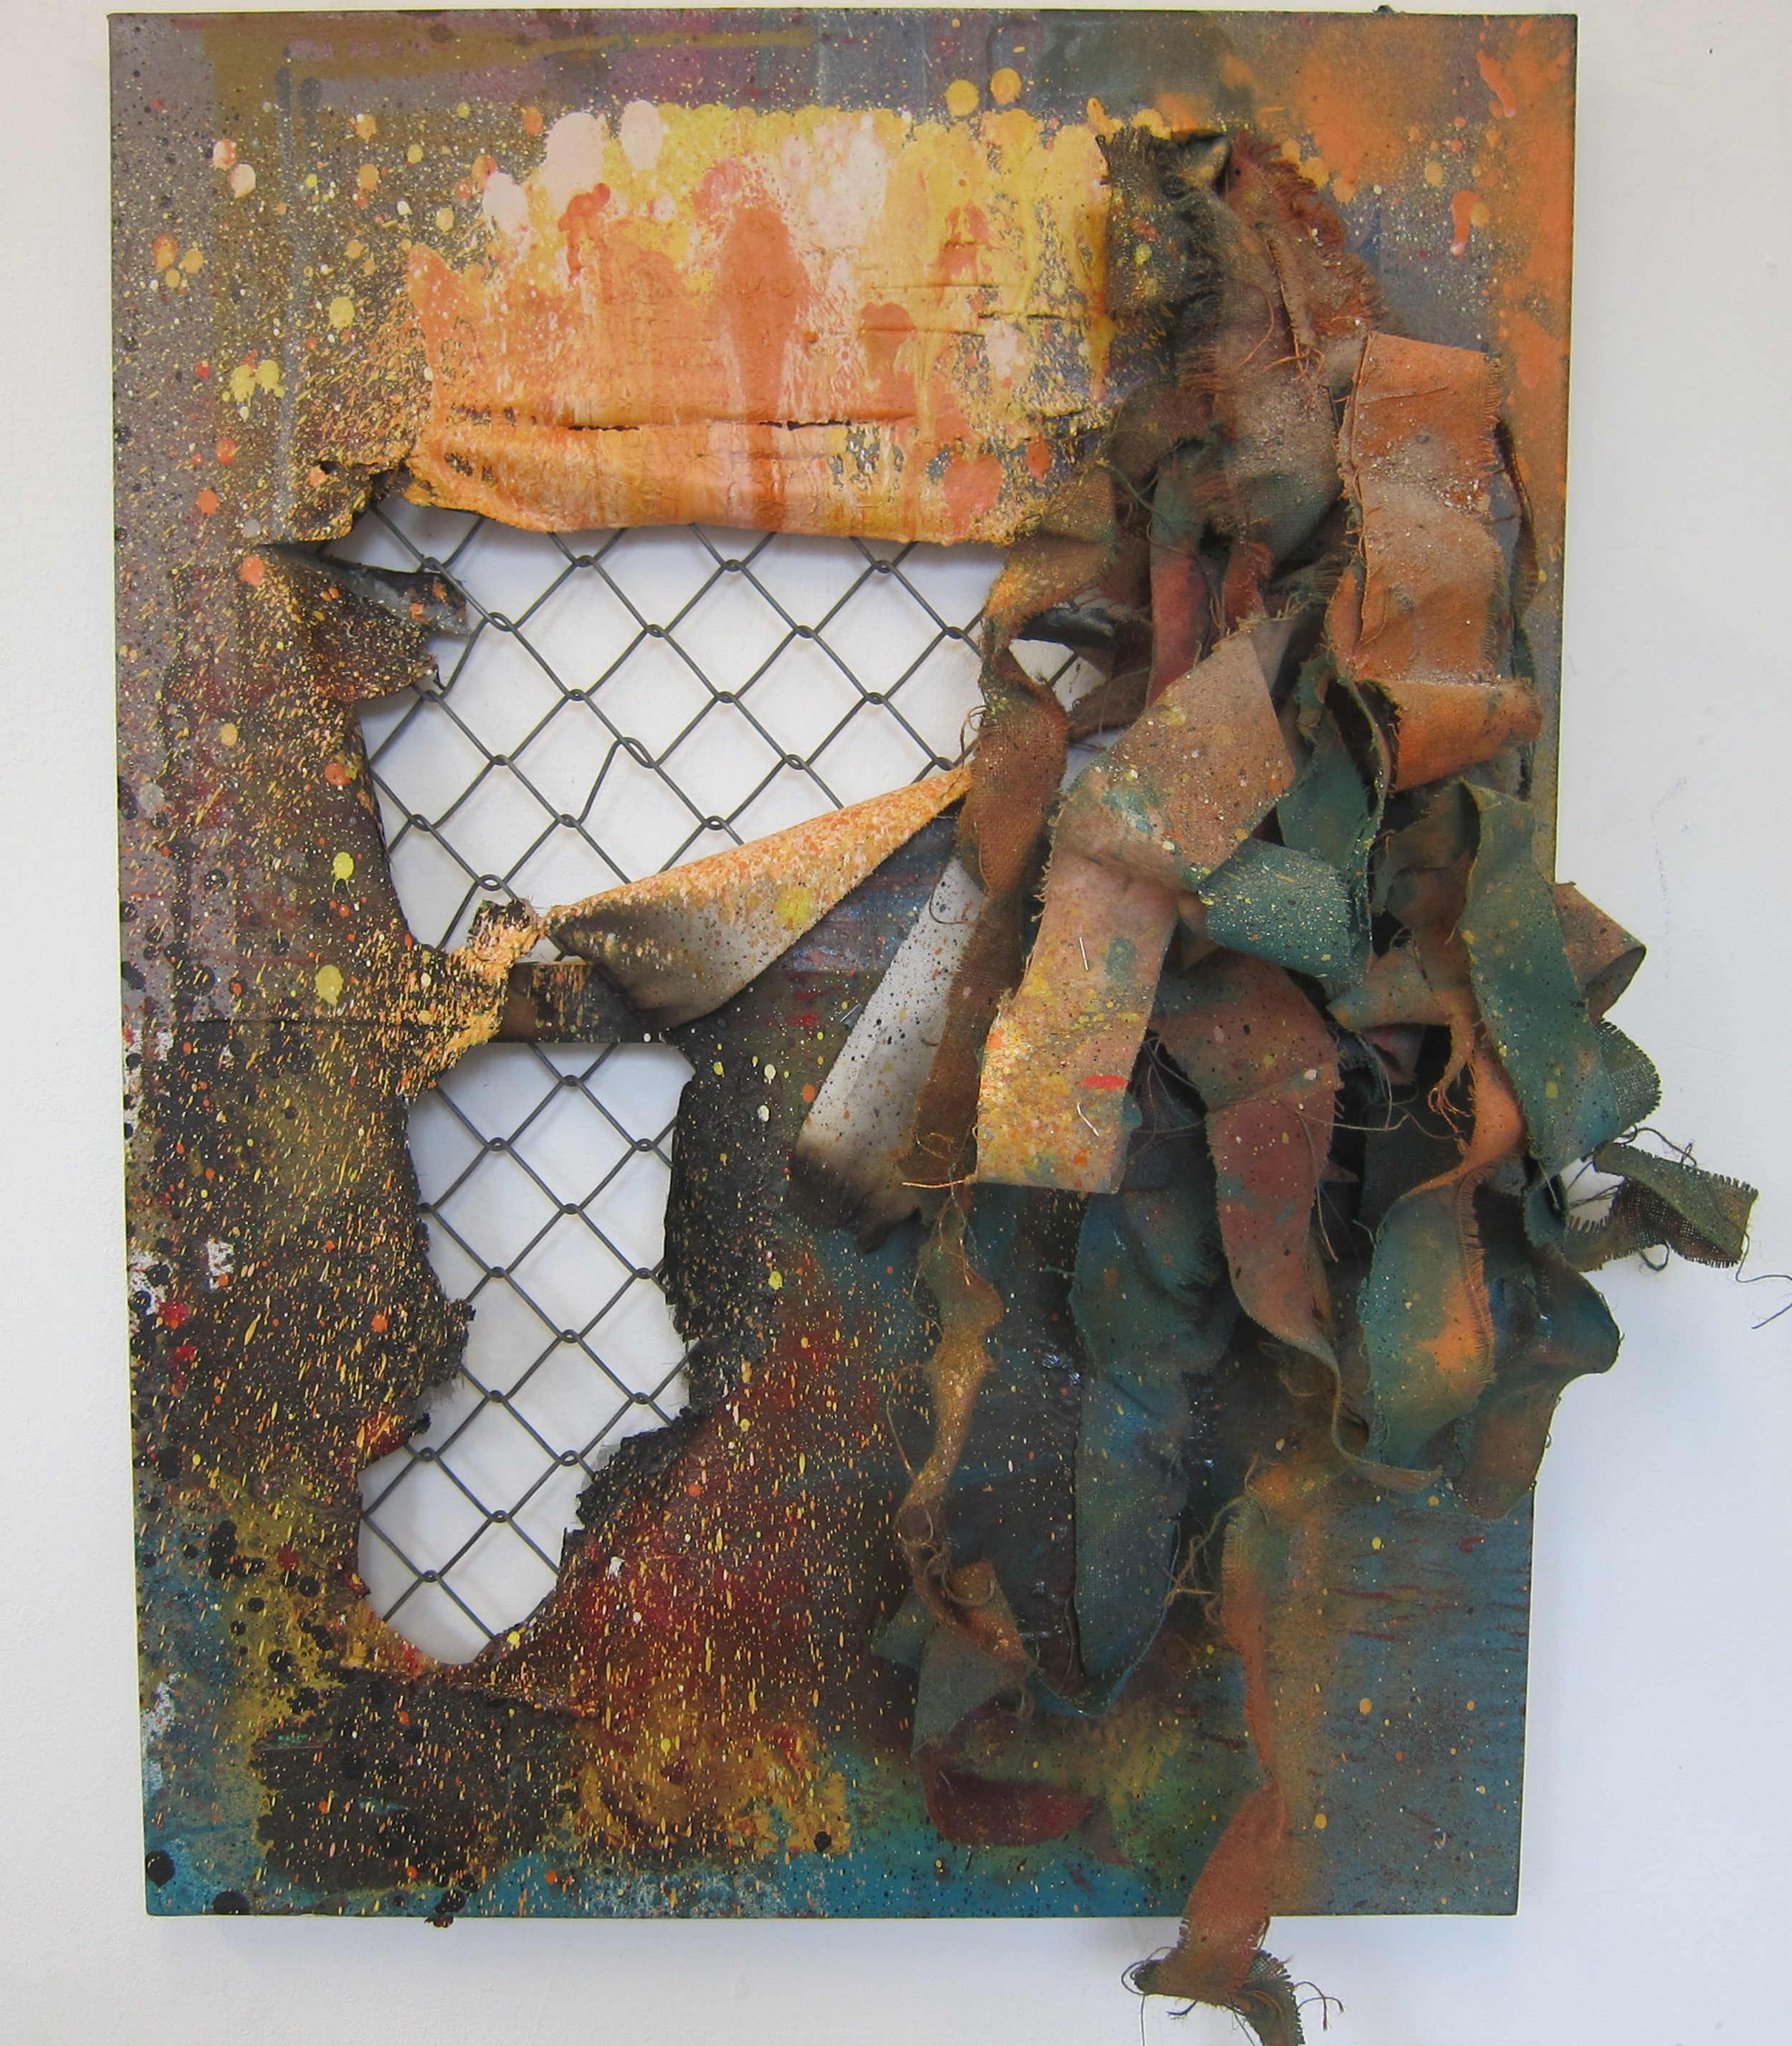   Institutionalised  .   Oil paint, alkyd resin, fire, fence and canvas.&nbsp;  80 x 60 cm.  2015. 